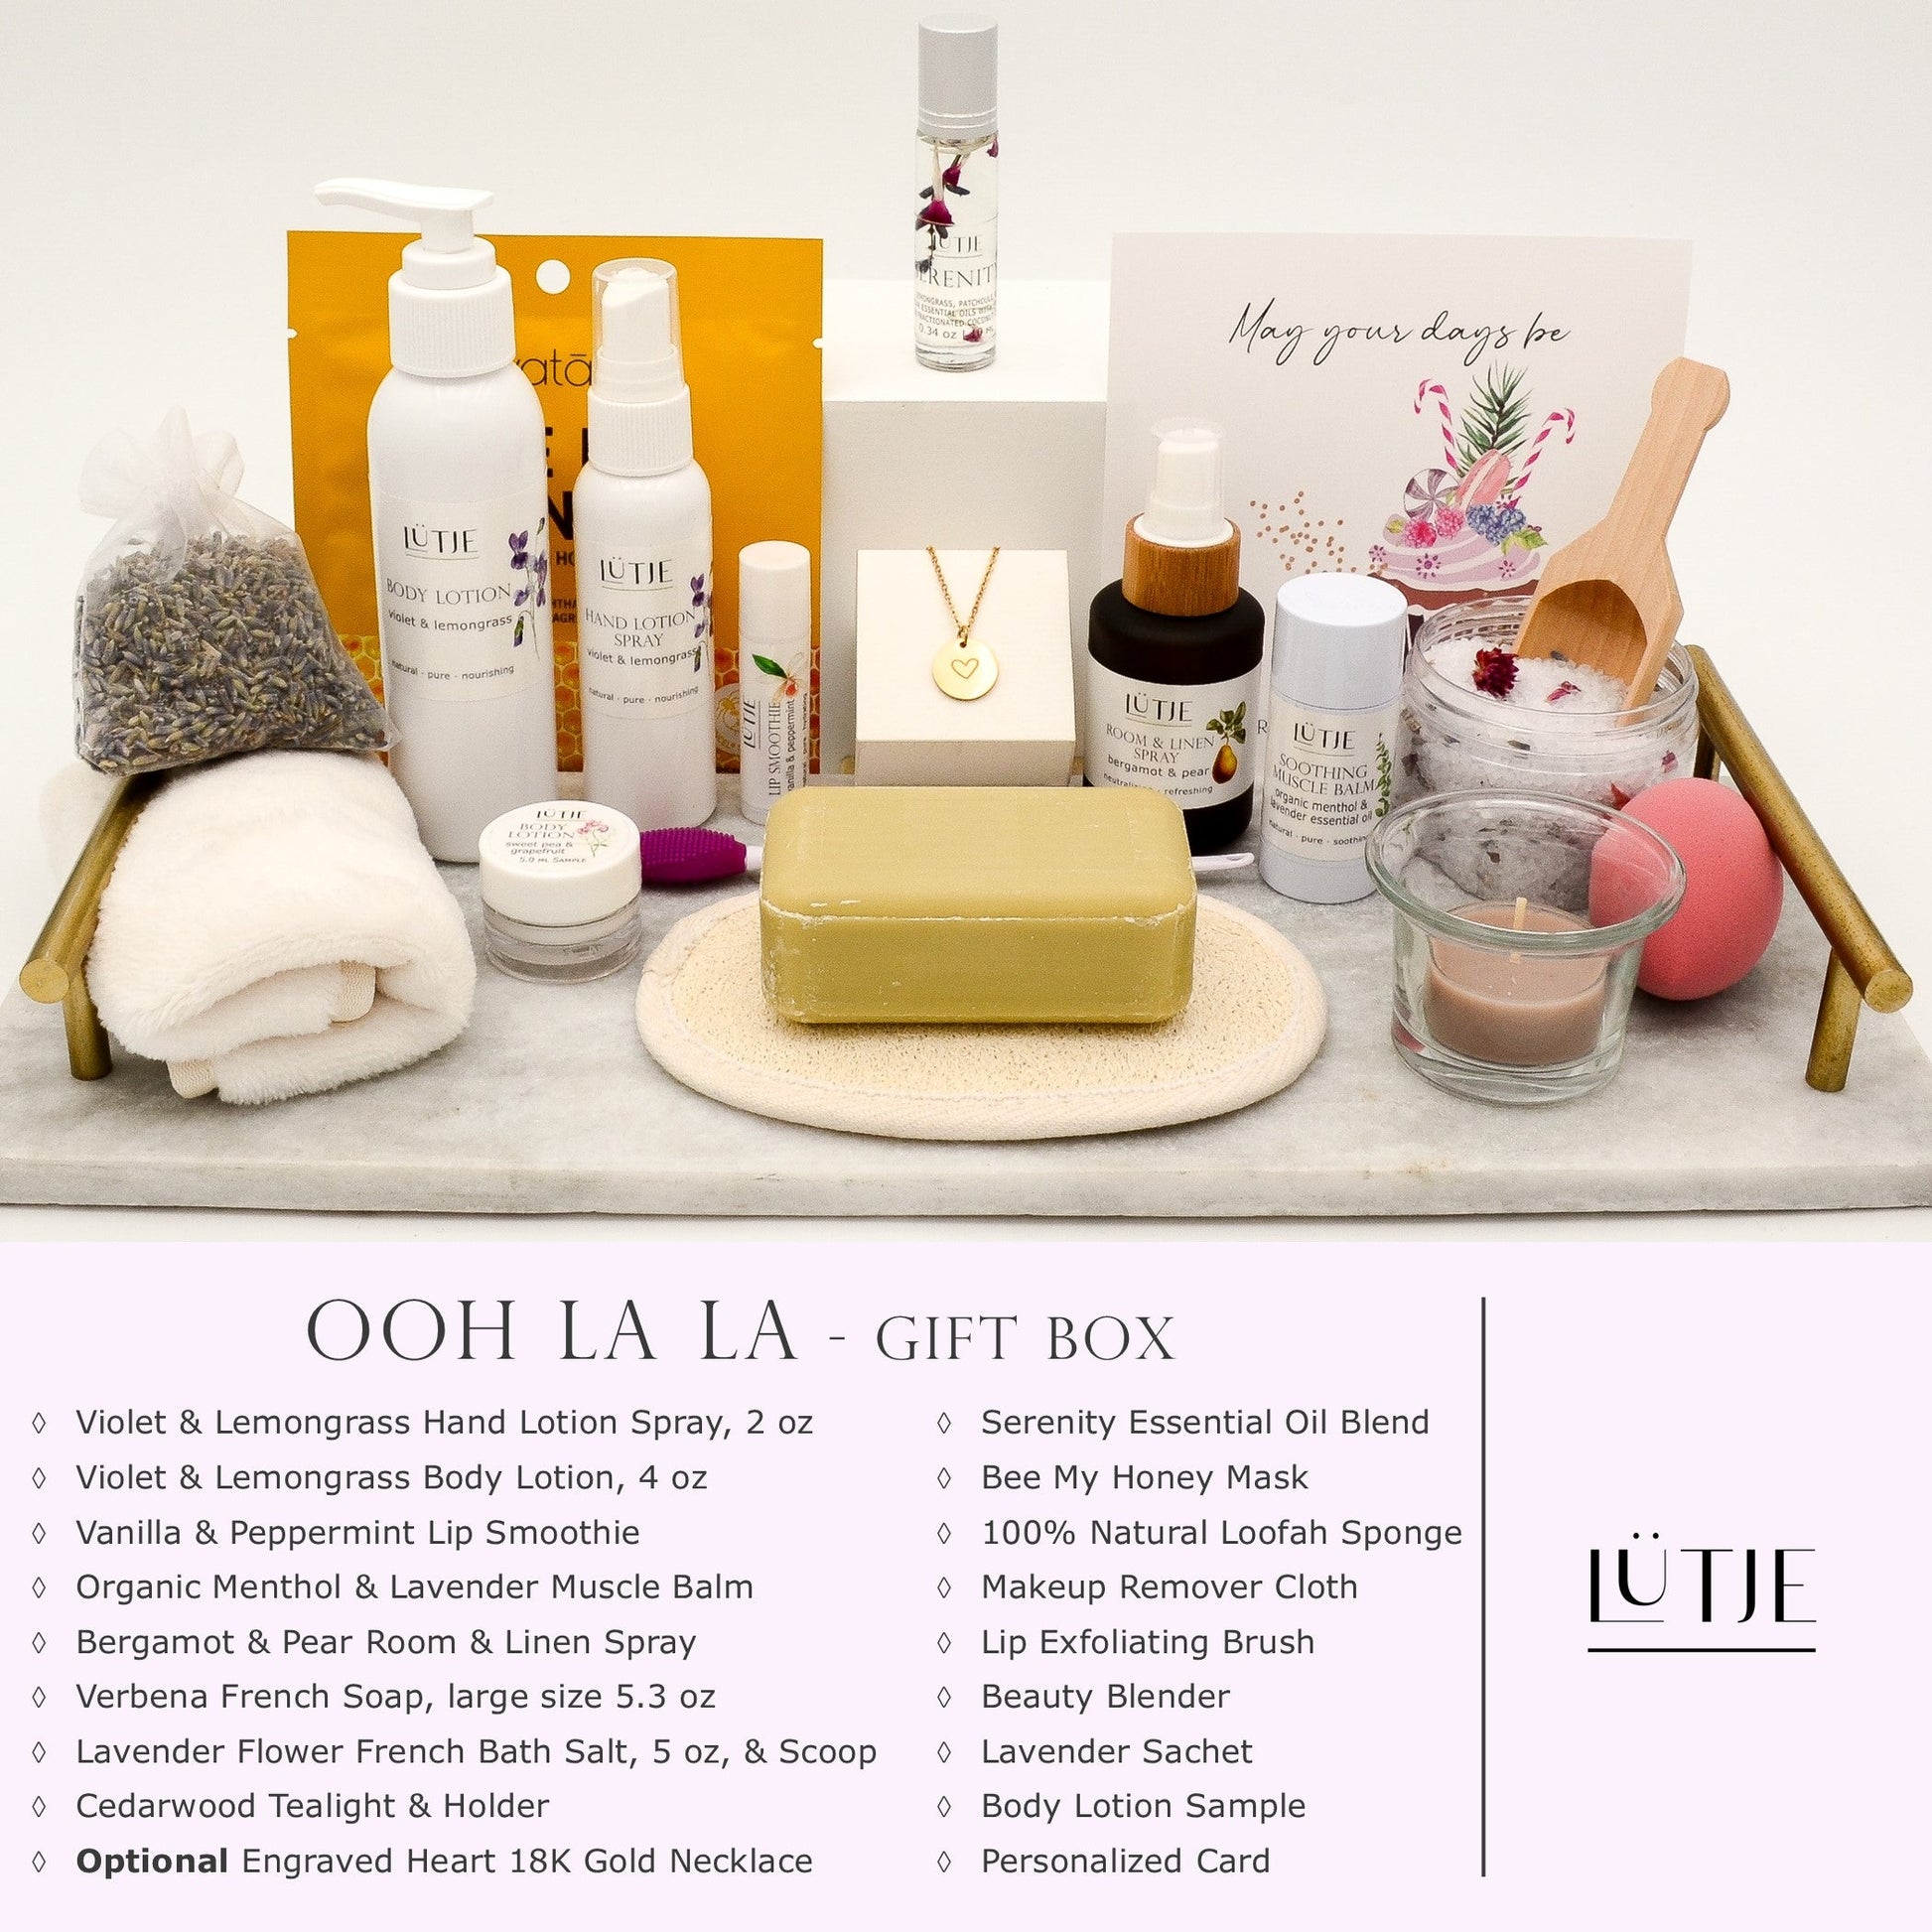 Ooh La La Gift Box for women, wife, daughter, BFF, sister, mom, or grandma, includes Violet & Lemongrass hand lotion spray and body lotion, essential oil, lip balm, soothing muscle balm, Bergamot & Pear room & linen spray, French soap, French bath salts, hydrating face mask, other bath, spa and self-care items, and optional 18K gold-plated necklace with engraved heart.